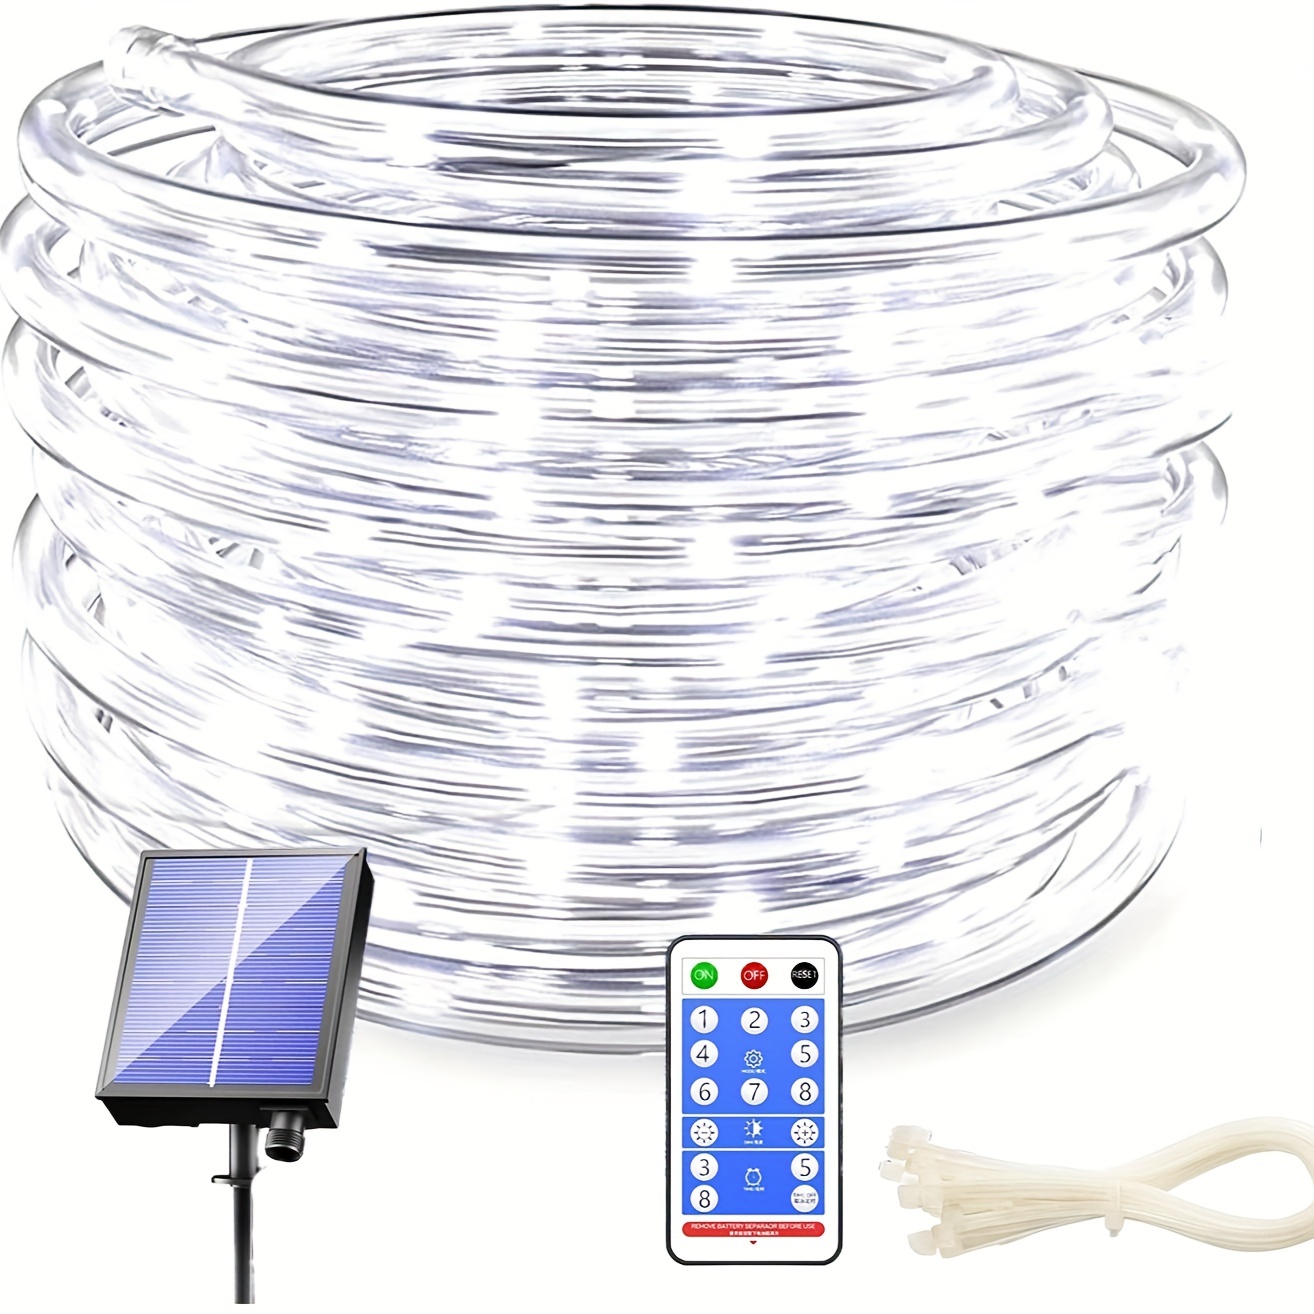 

1pc Solar Rope Lights, Outdoor Waterproof, 100/200 Led Solar Rope String Lights, 8 Modes With Remote Flexible Solar Tube String Lights, For Garden Patio Fence Balcony Pool Trampoline Party